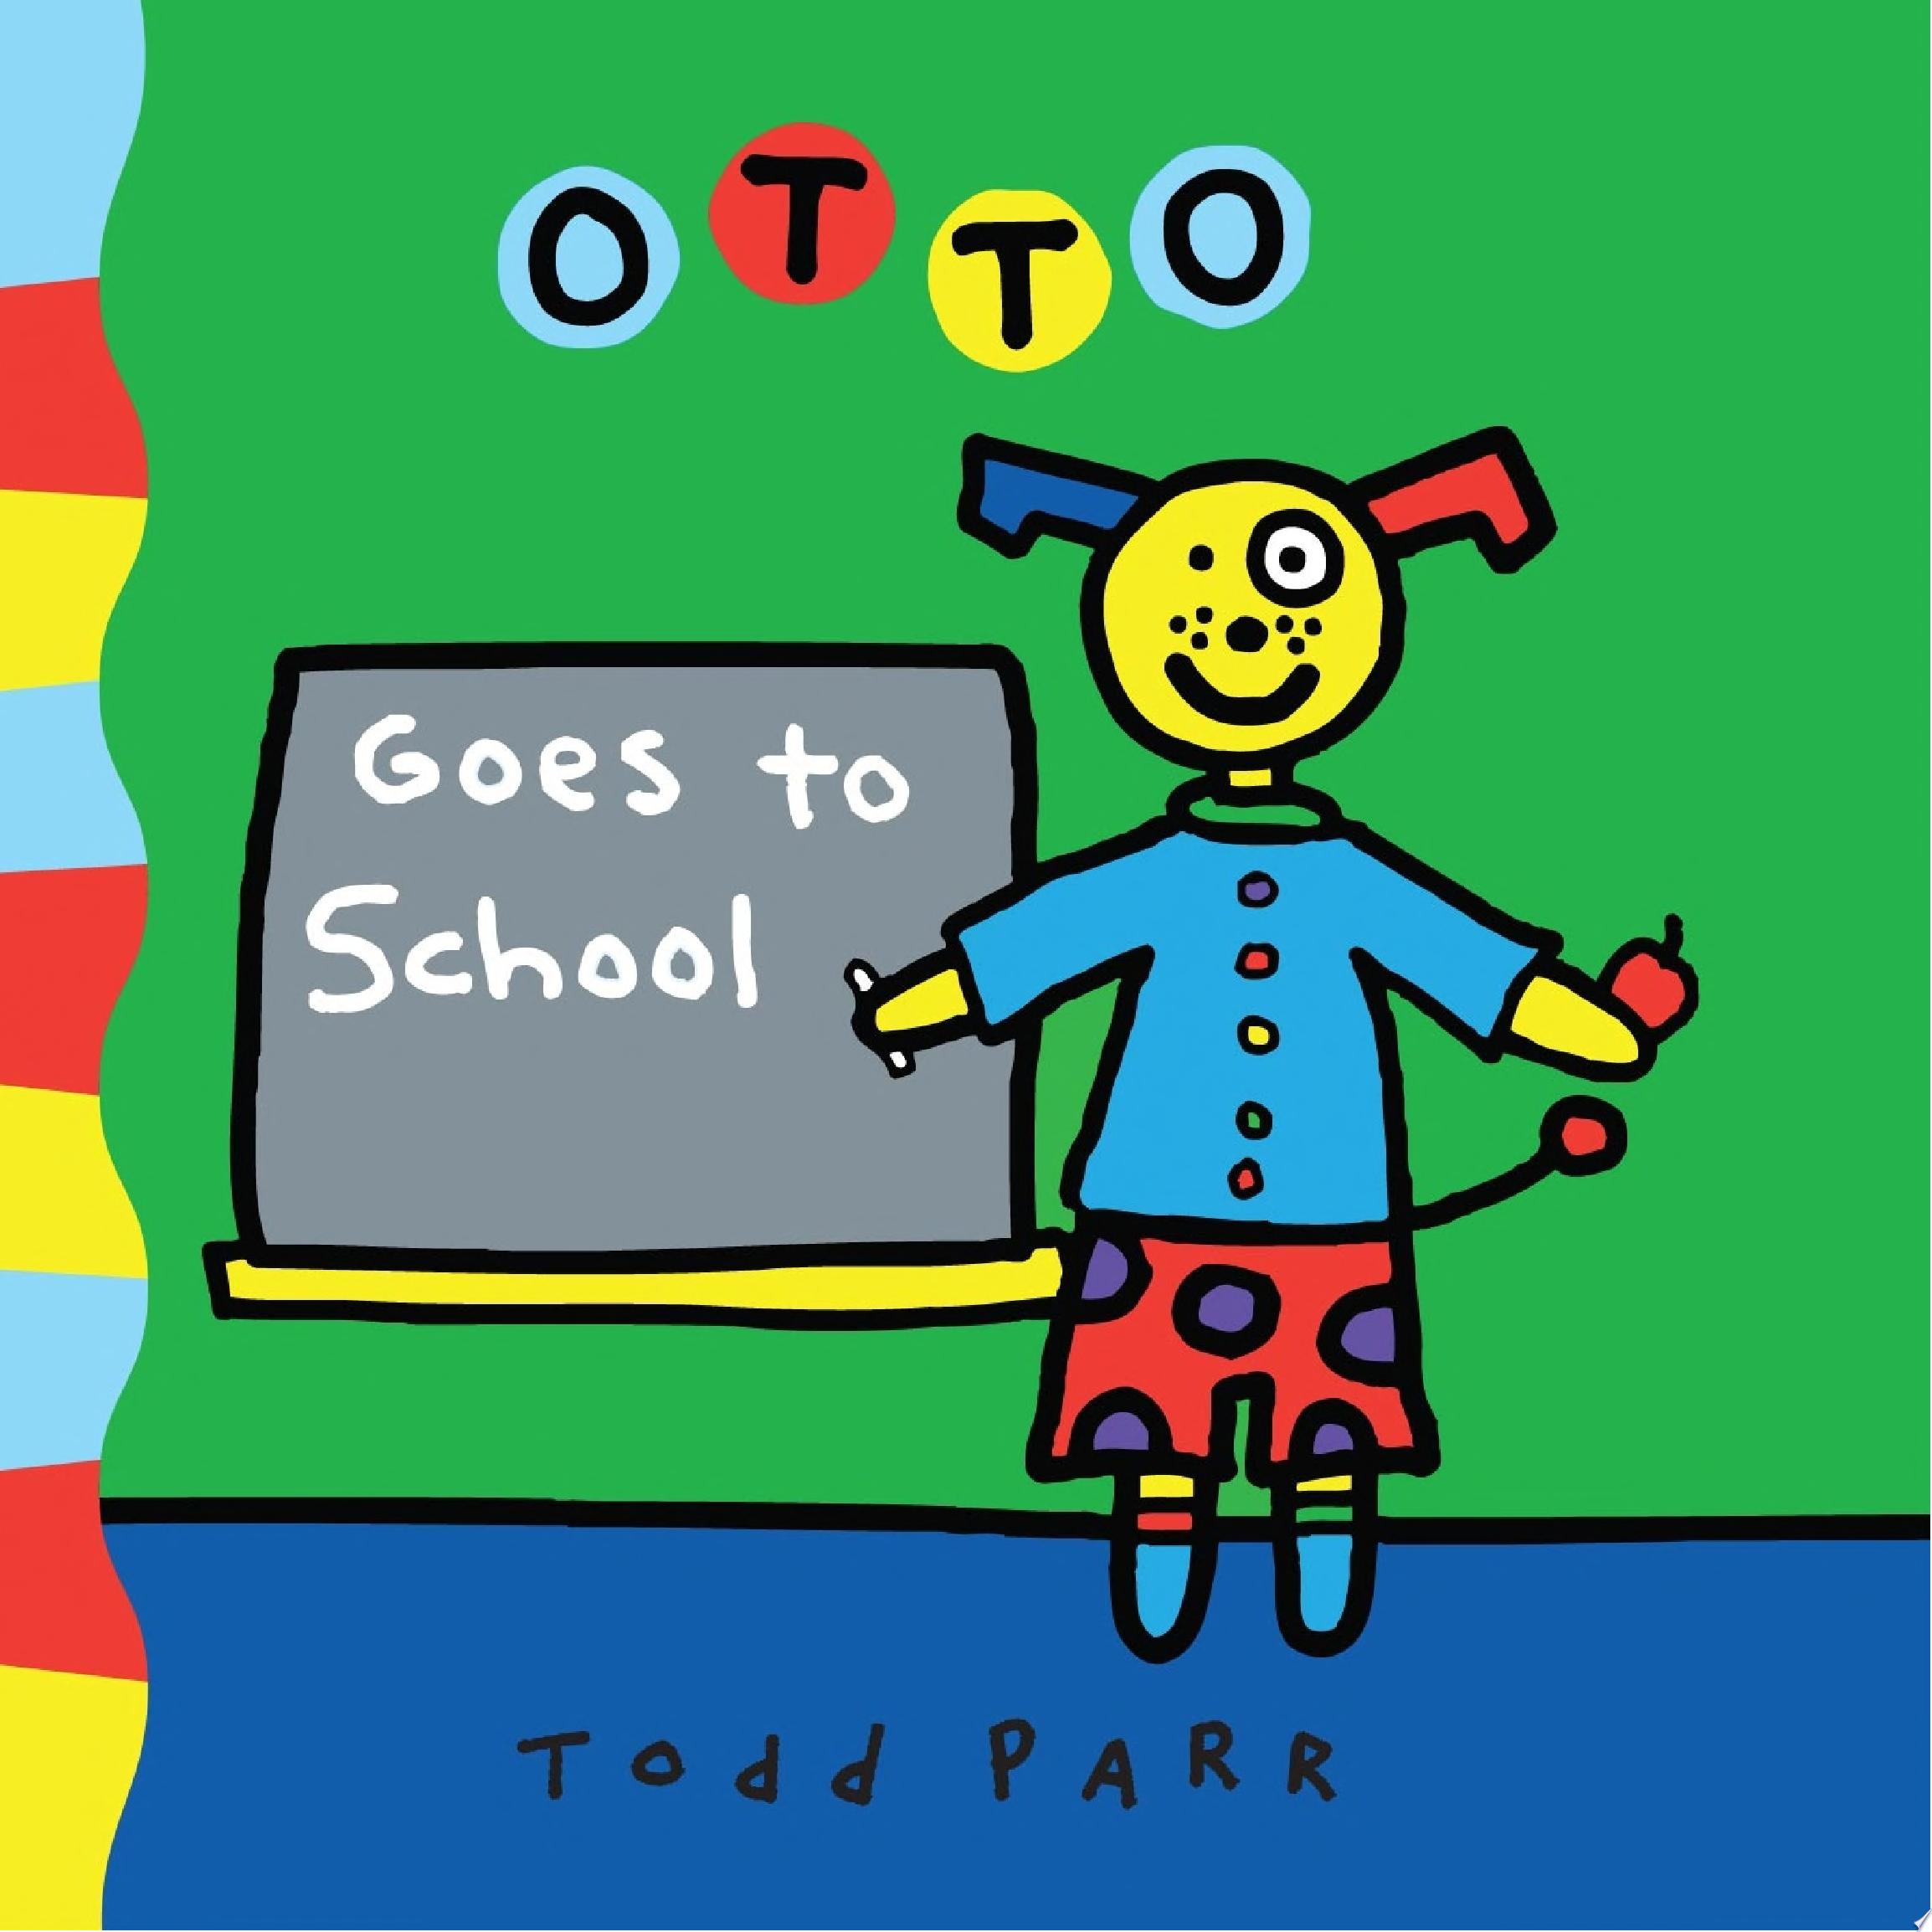 Image for "Otto Goes to School"